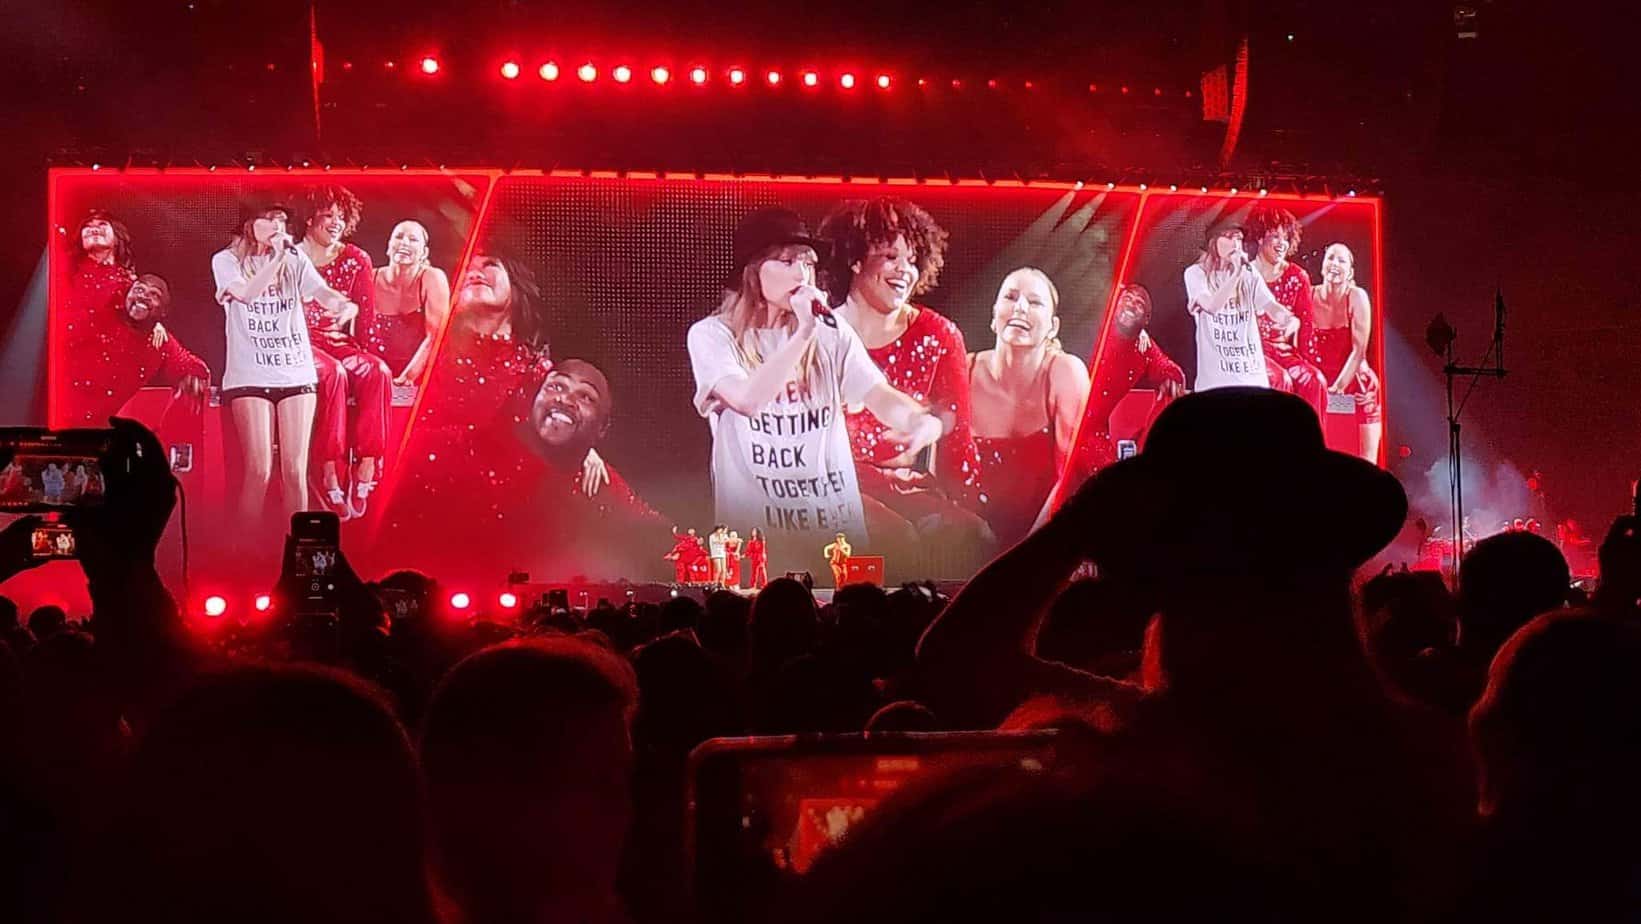 Taylor Swift singing 22 at the Eras Tour. Wearing a black hat and a shirt that says Never Getting Back Together. 